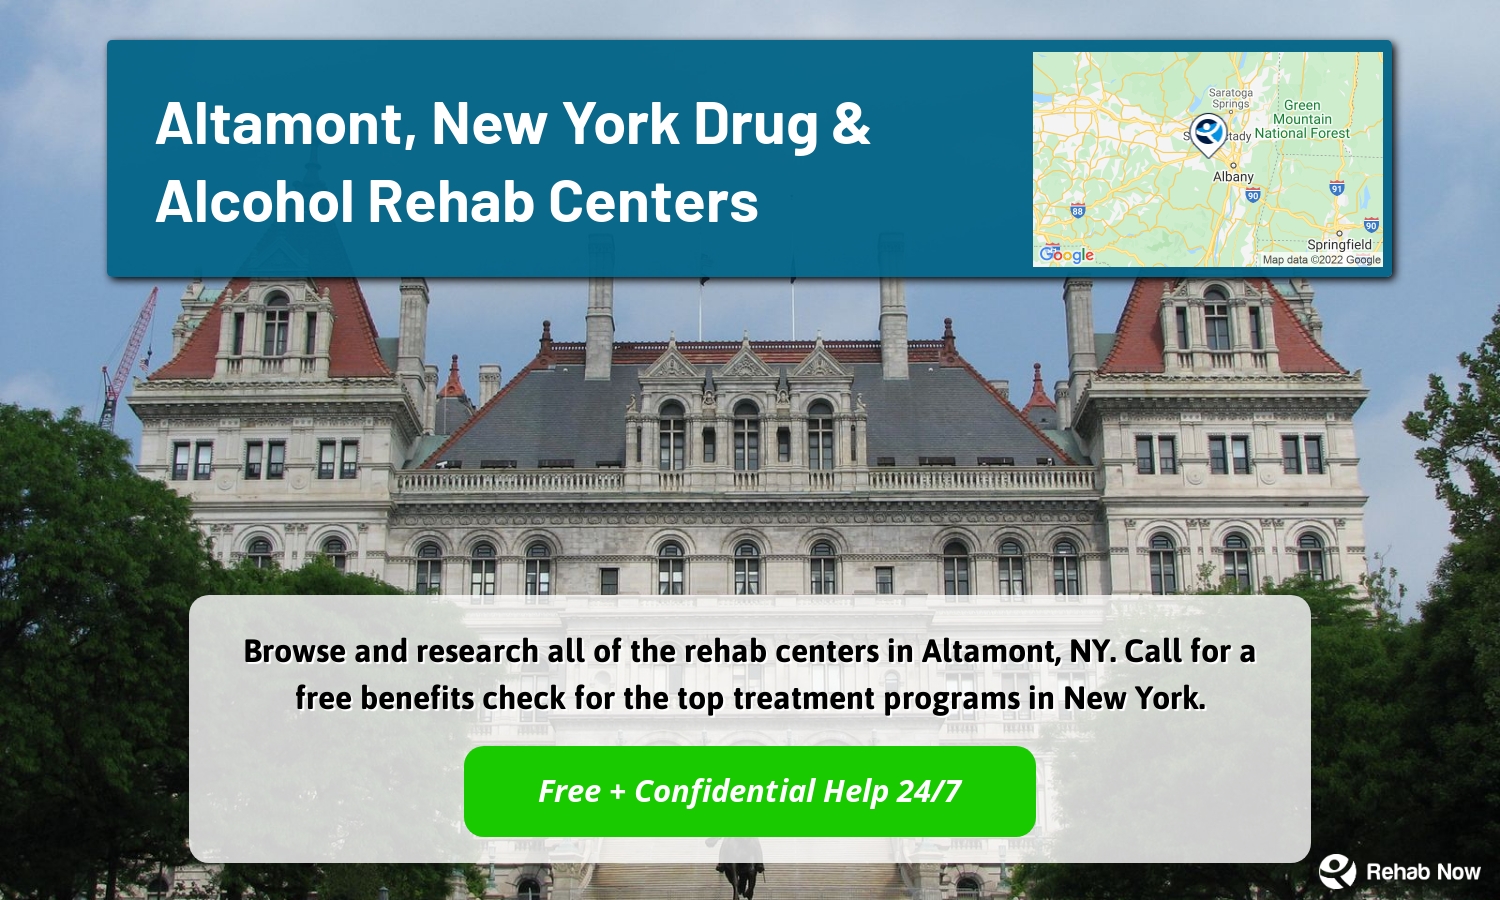 Browse and research all of the rehab centers in Altamont, NY. Call for a free benefits check for the top treatment programs in New York.